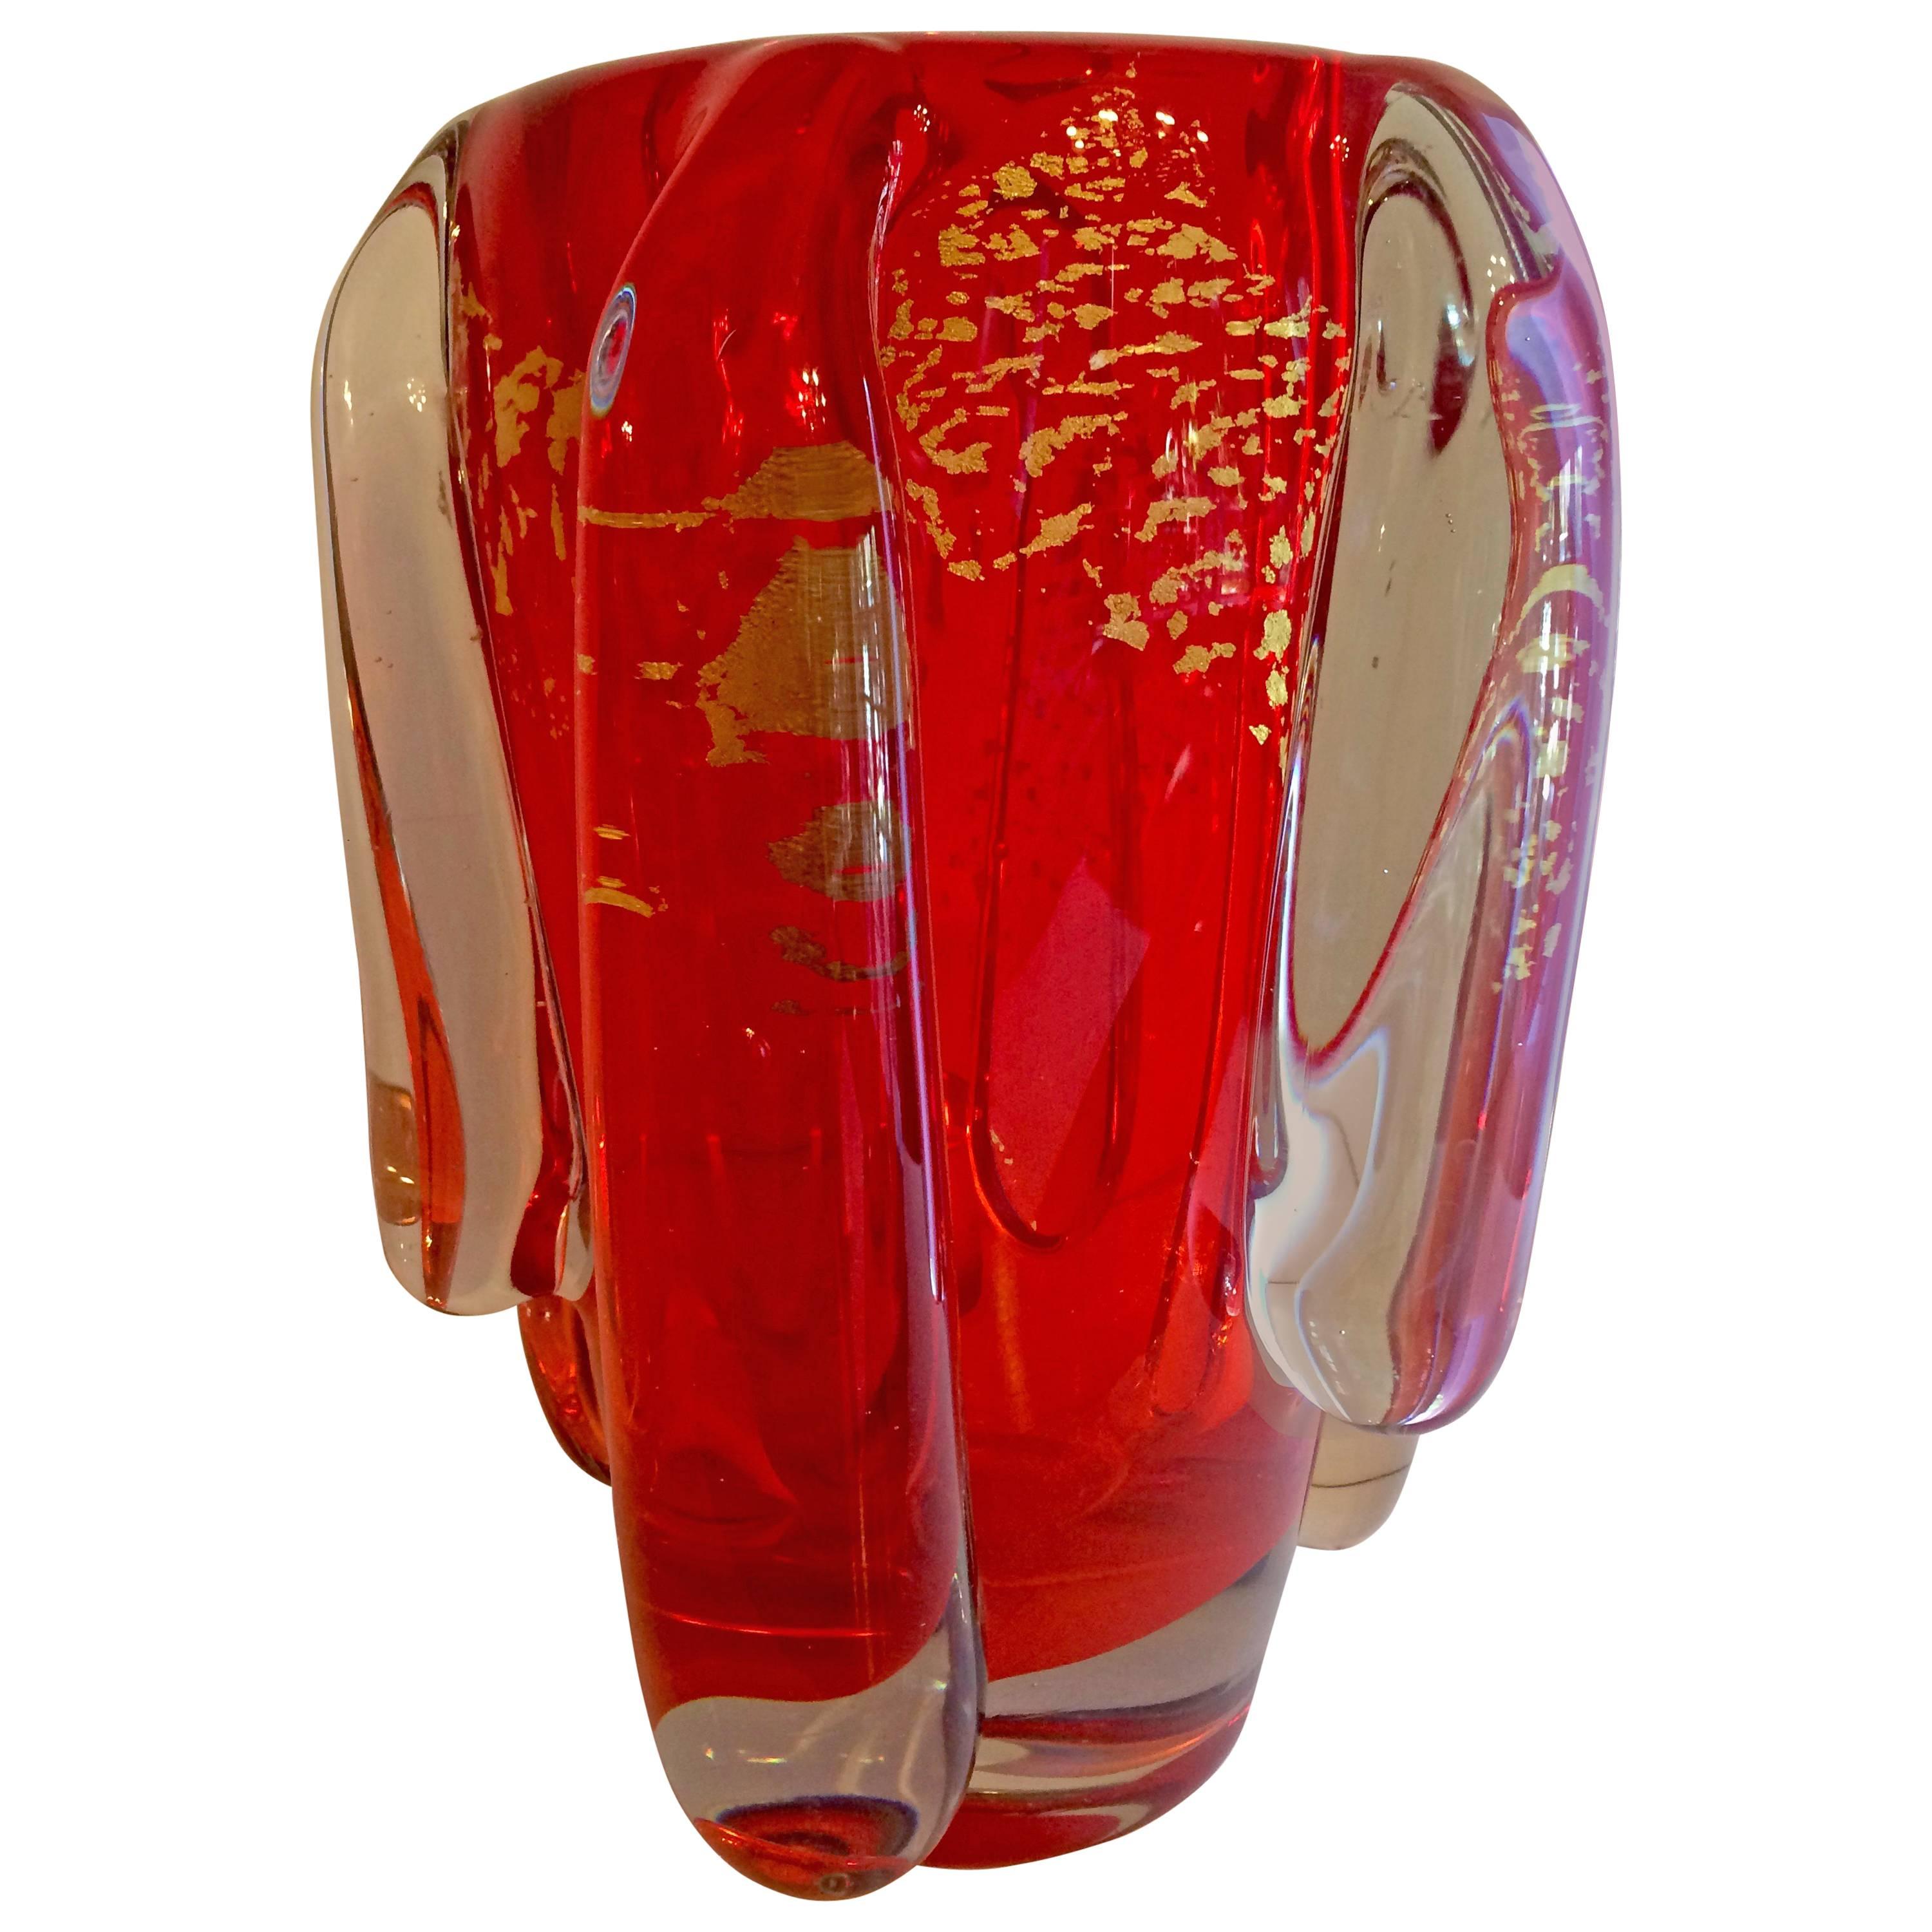 Exceptional Red Ercole Barovier Murano Vase with 24-Karat Gold